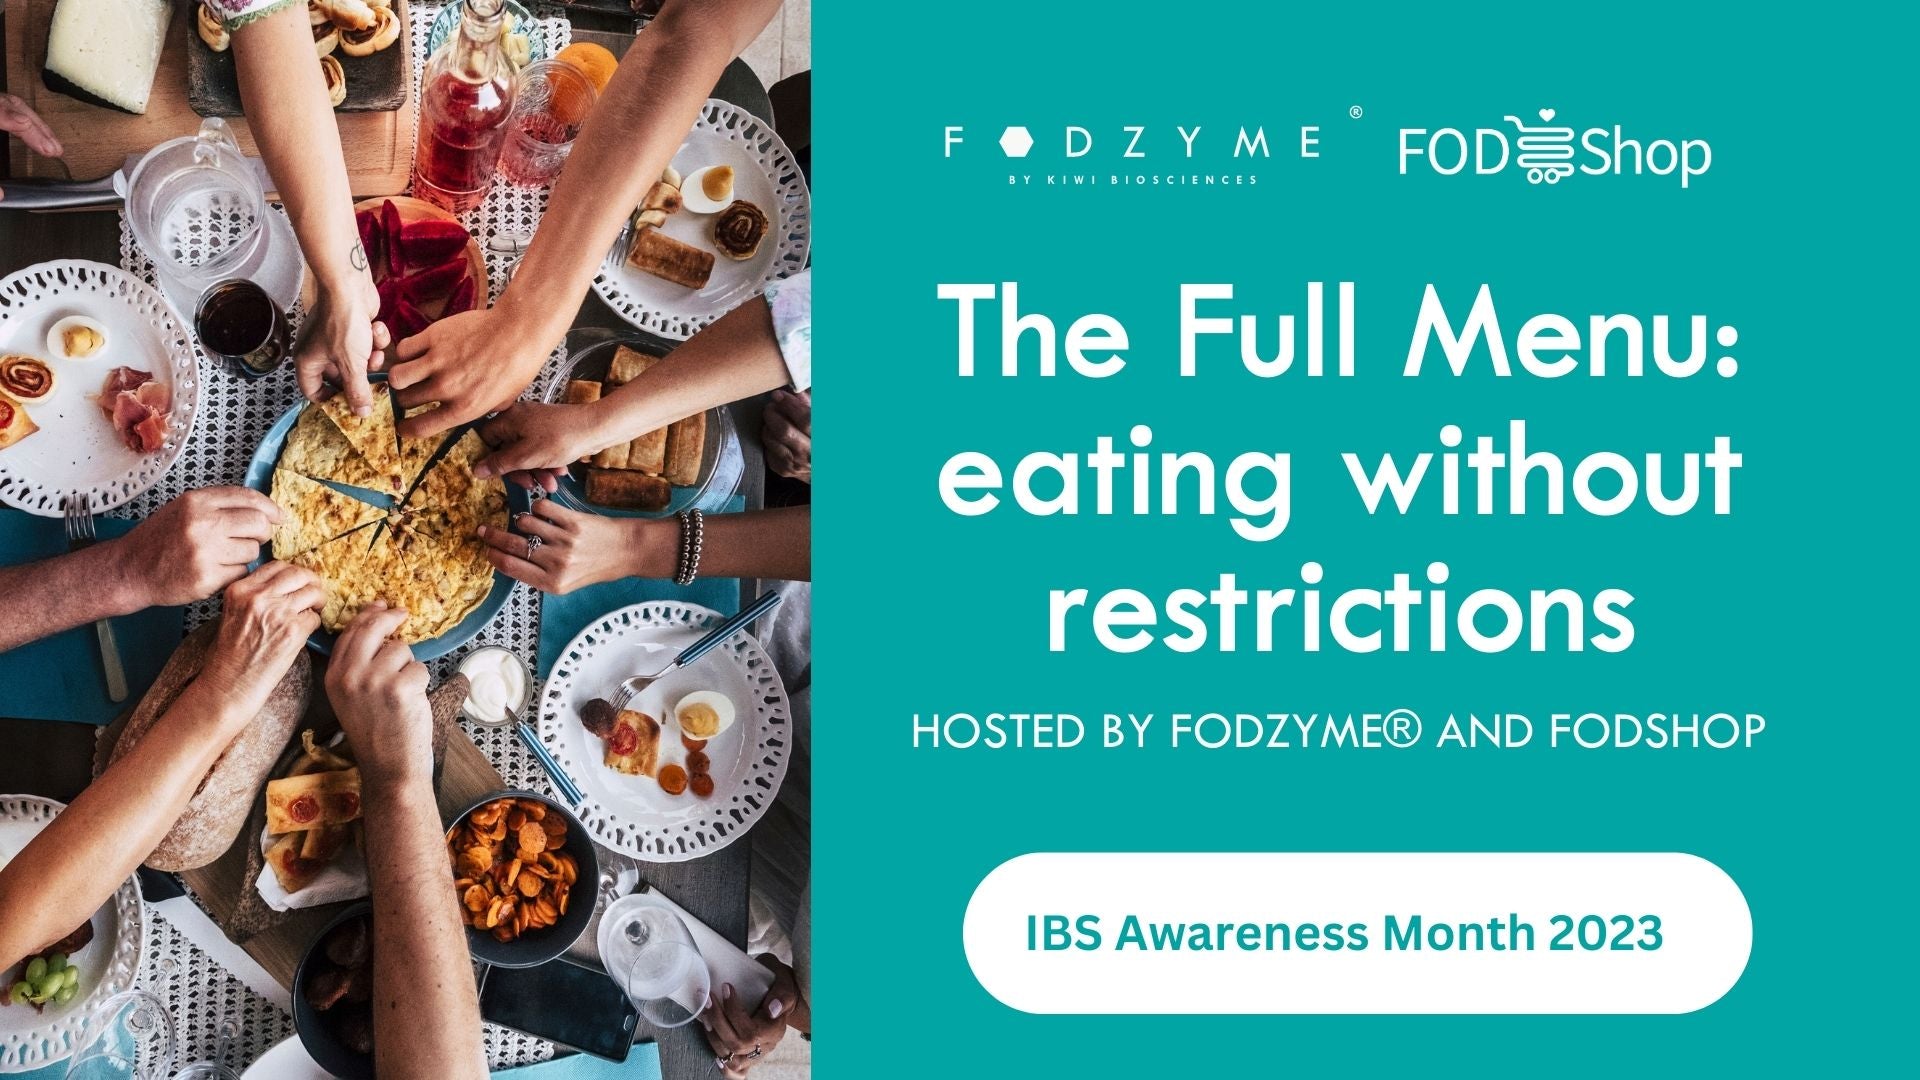 WEBINAR RECORDING: FODZYME and FodShop - The Full Menu: Eating Without Restrictions